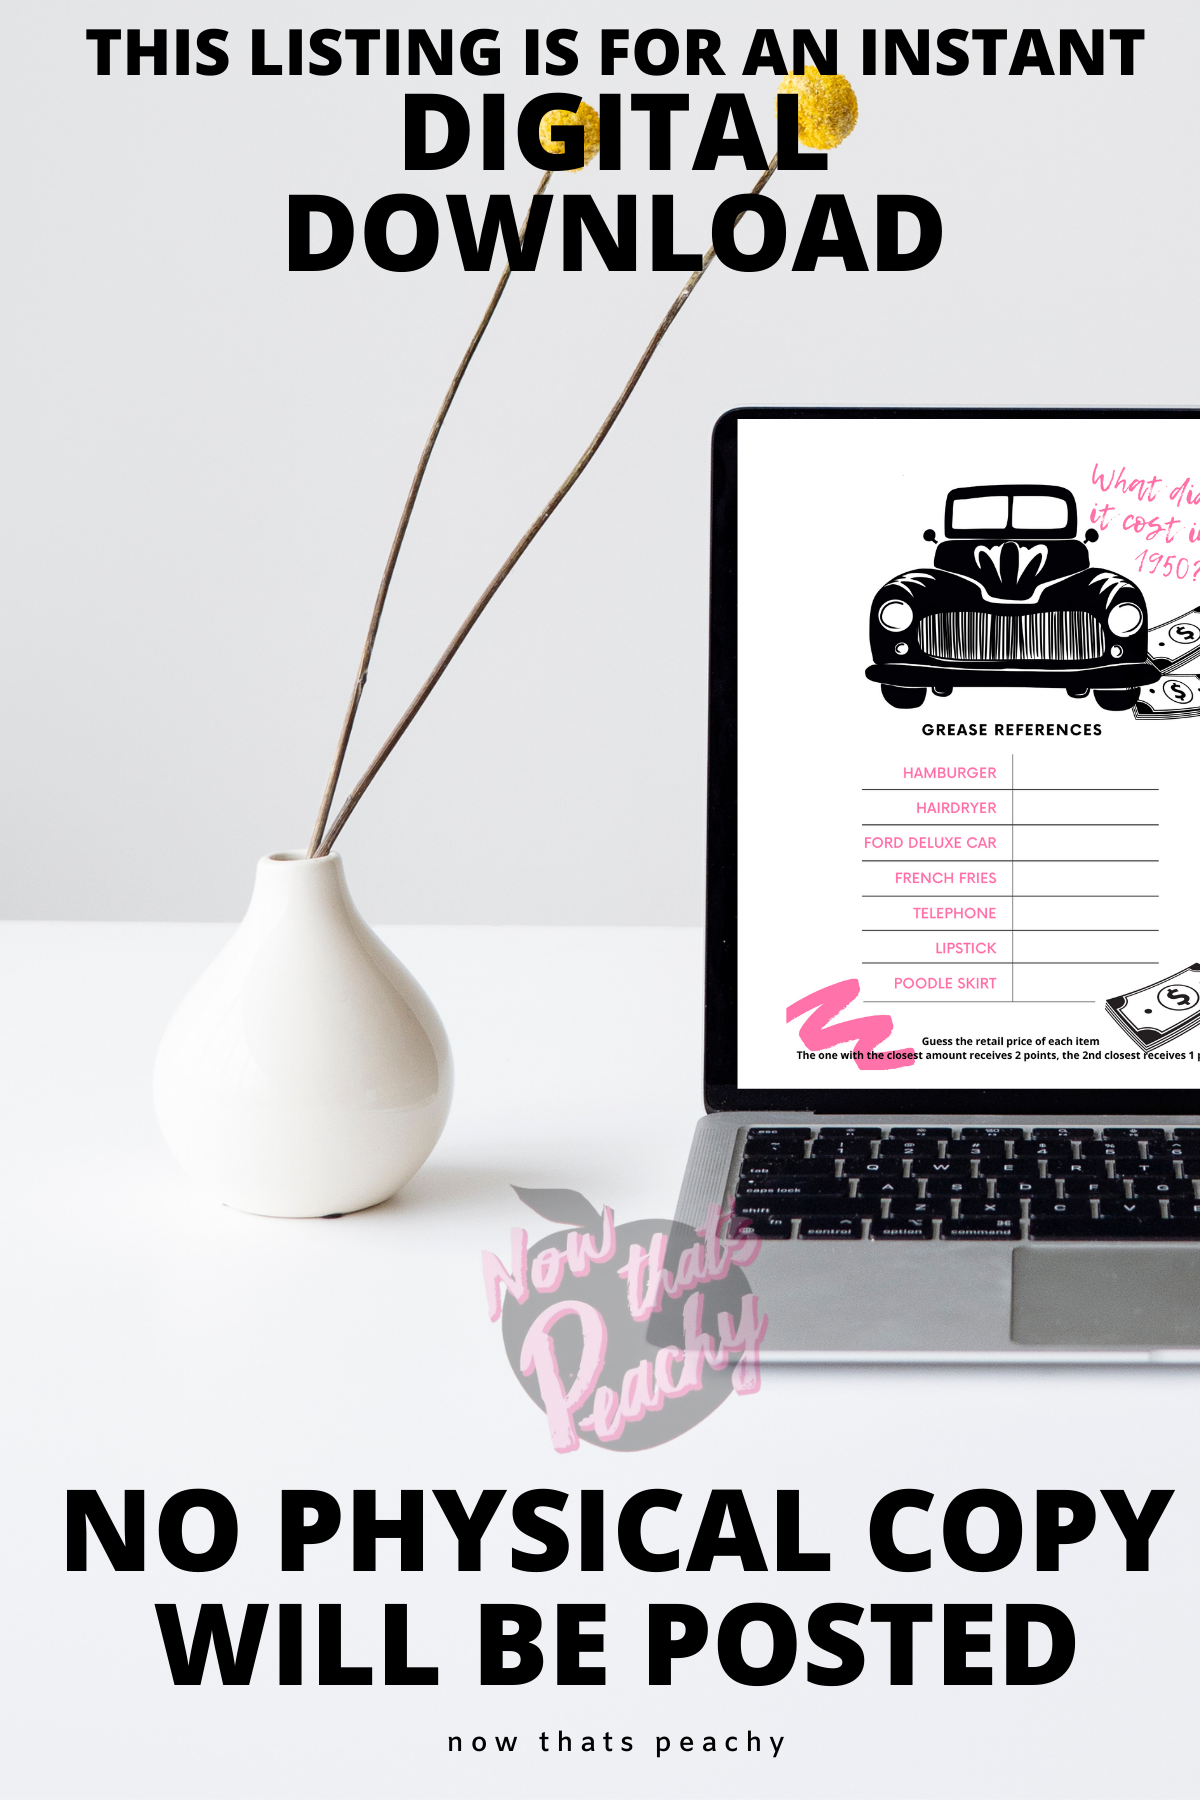 Grease Movie what does it cost in 1950 trivia  quiz question game party package 1950s fifties 50's printable template digital instant download edit Danny Sandy T-birds Pink Ladies  invite soda hop jukebox rockabilly rock'n'roll musical movie design black white modern color fun themed bachelorette birthday charity fundraiser event activity